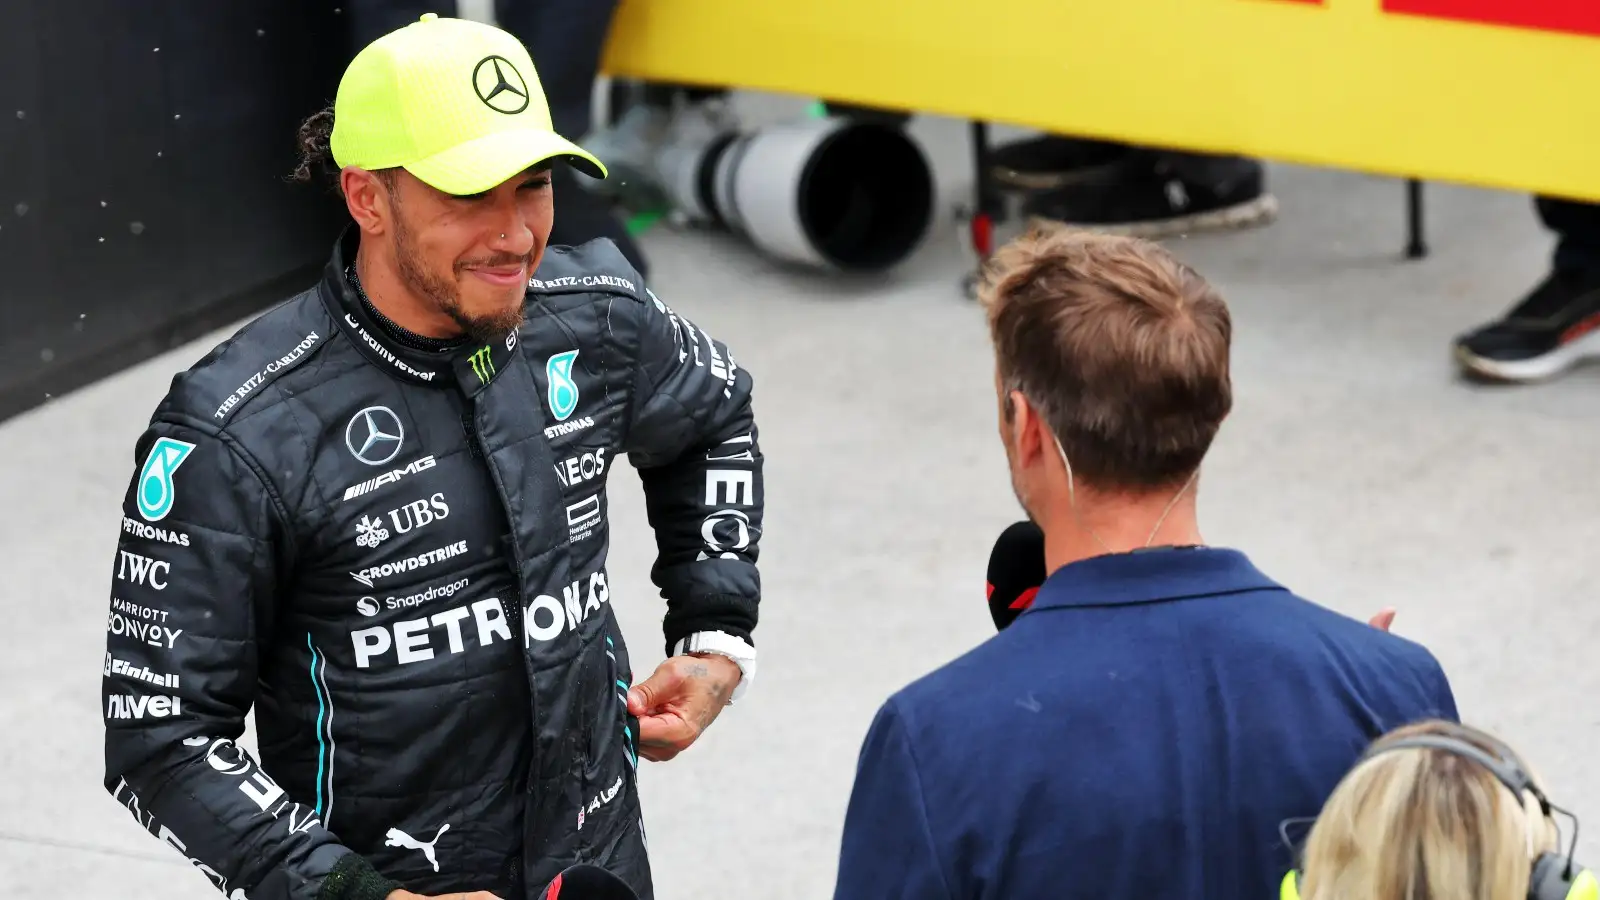 Lewis Hamilton being interviewed by Jenson Button.